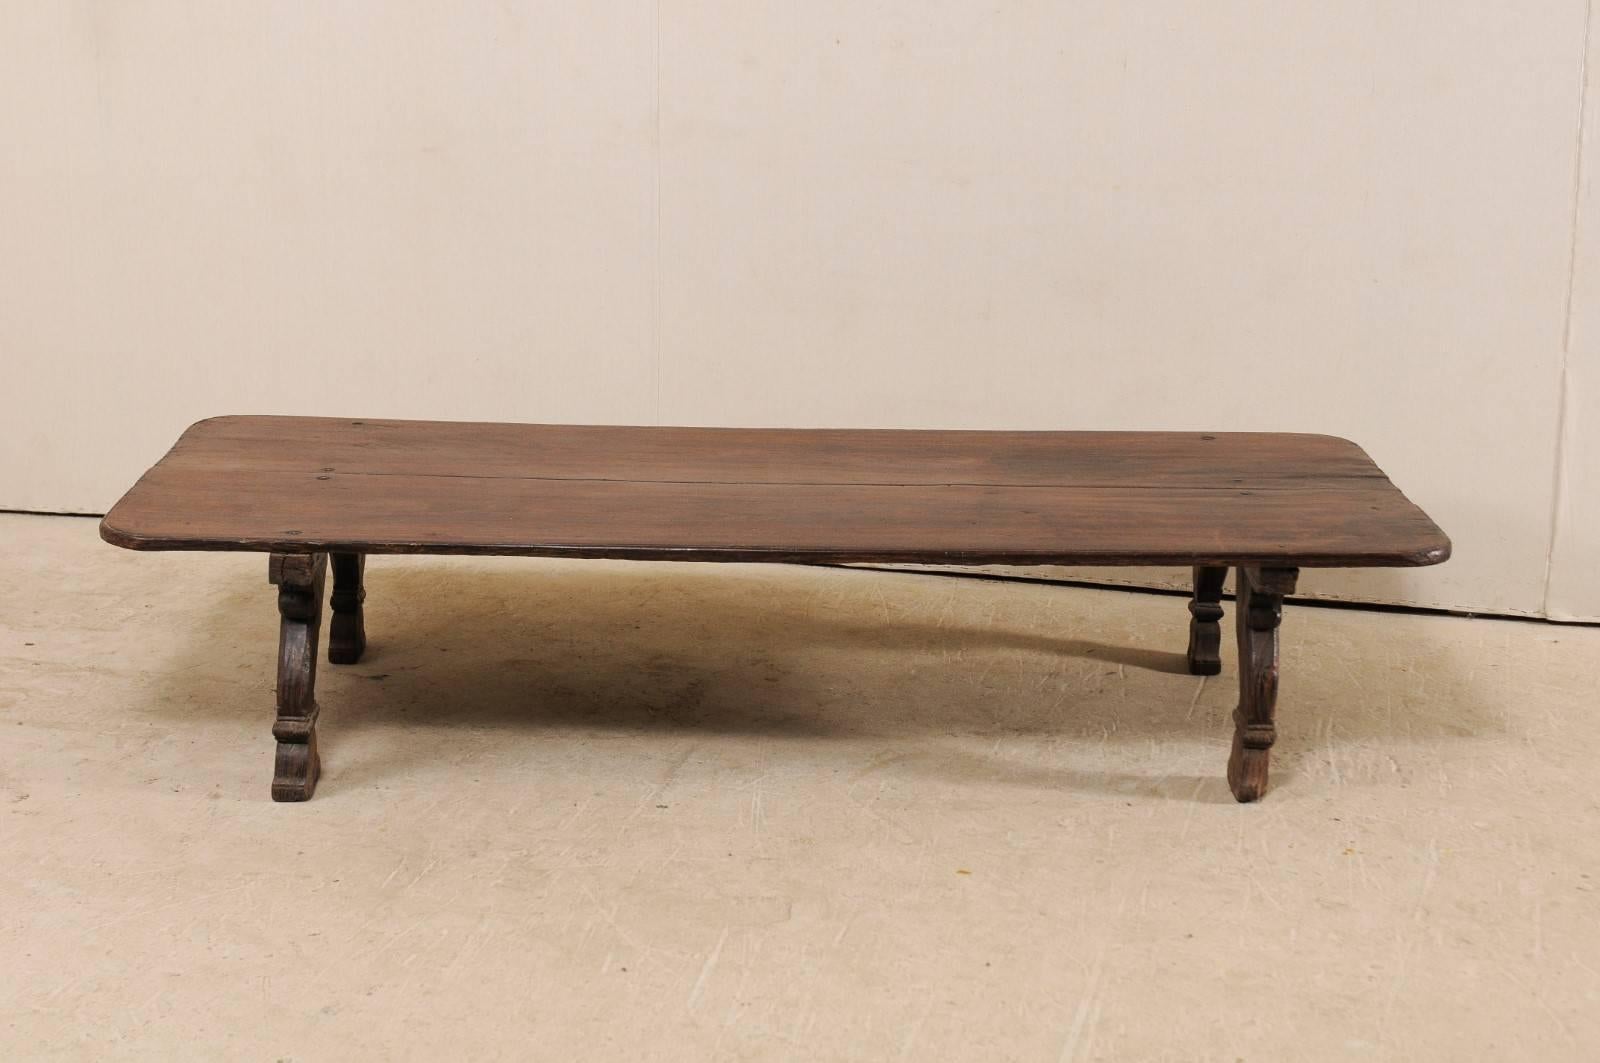 Indian British Colonial Midcentury, Rectangular Carved Wood Coffee Table